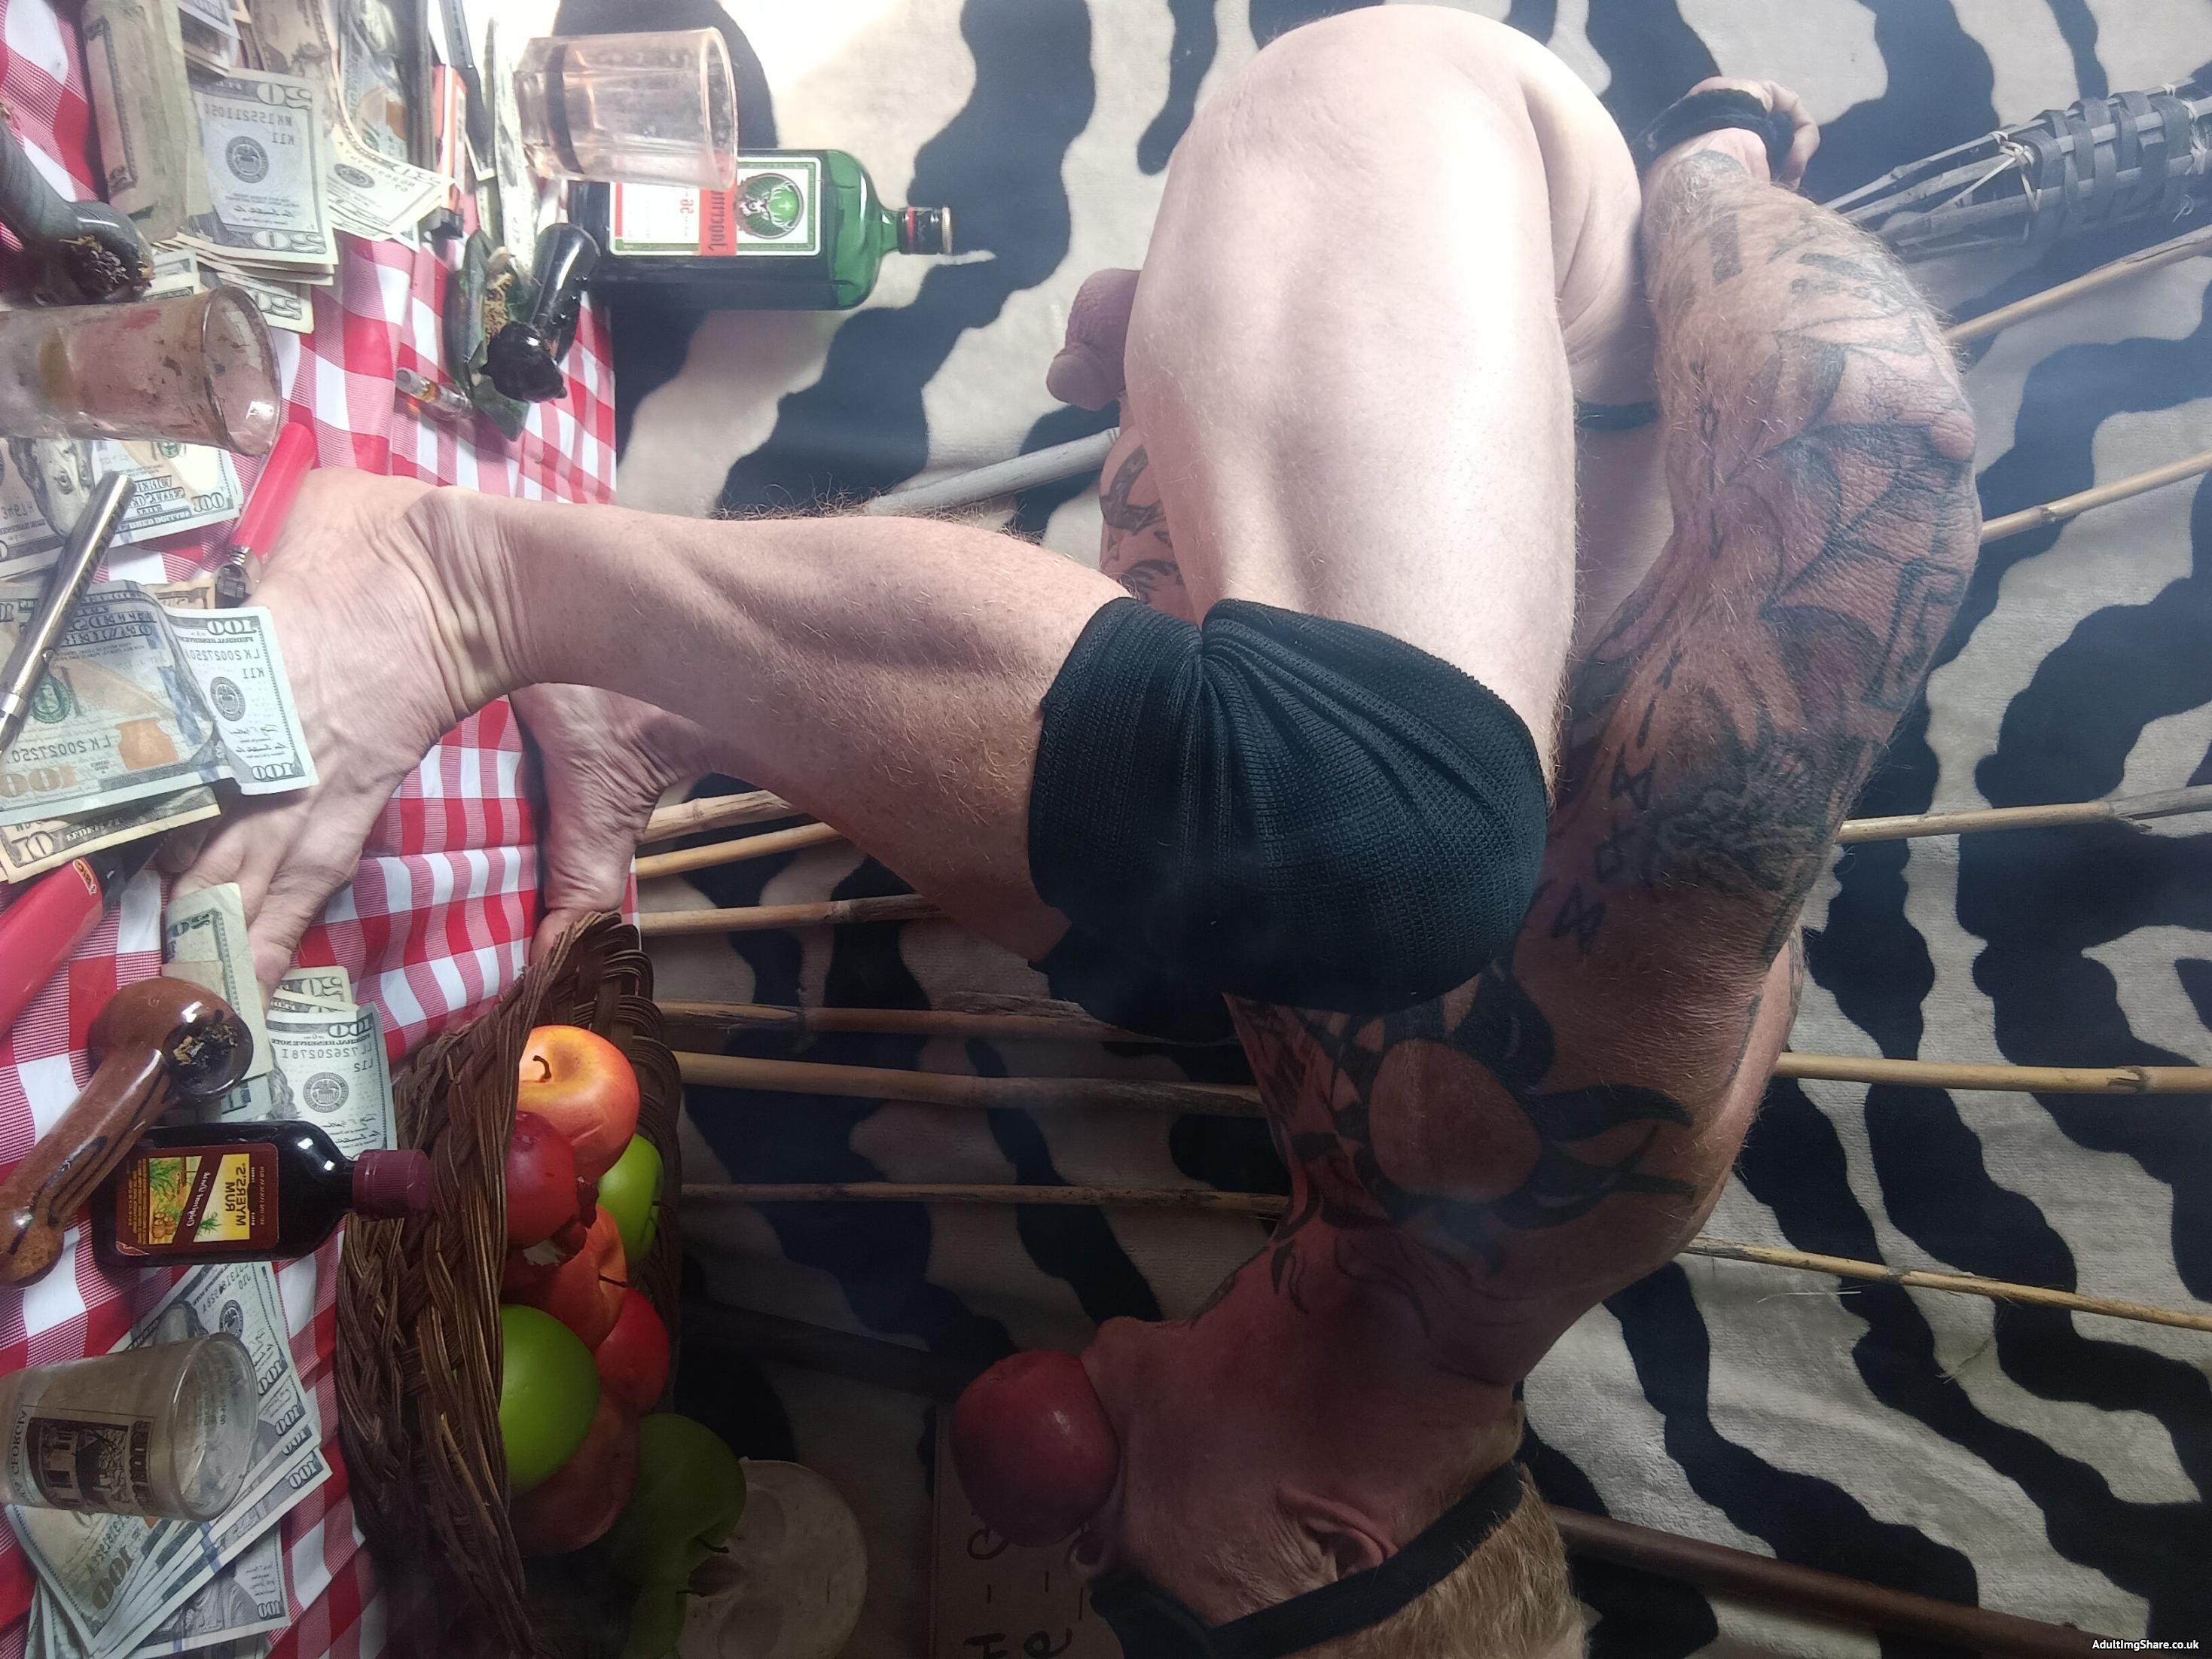 Tied and blindfolded, The Dancing Longpig avoids The Spit (BBQ) by biting a Red Apple over a Green Apple.